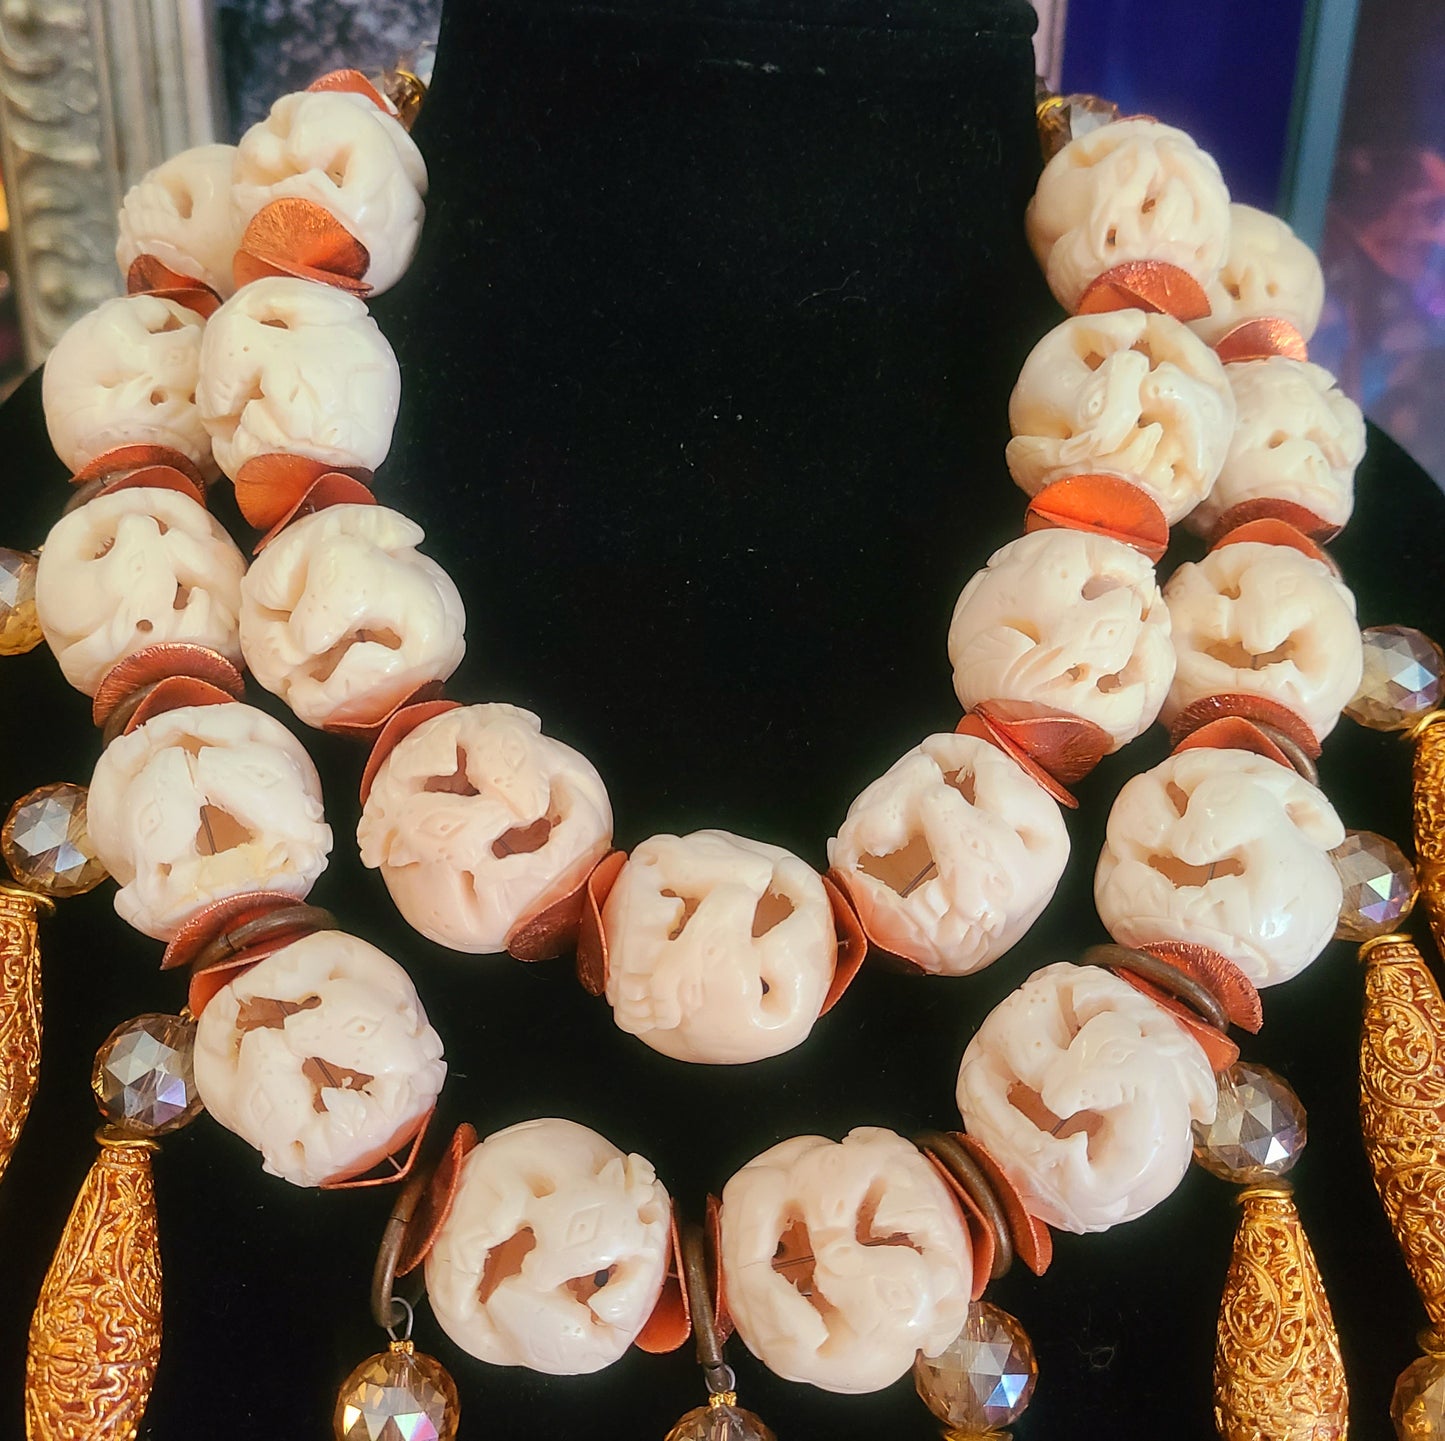 Hand Carved Goat Motif Bone Beaded Multi Strand Necklace - Cream Gold Copper & Citrine Haute Couture Bib - Kat Kouture Jewelry Designs - Bold Chunky & Heavy Neck Candy